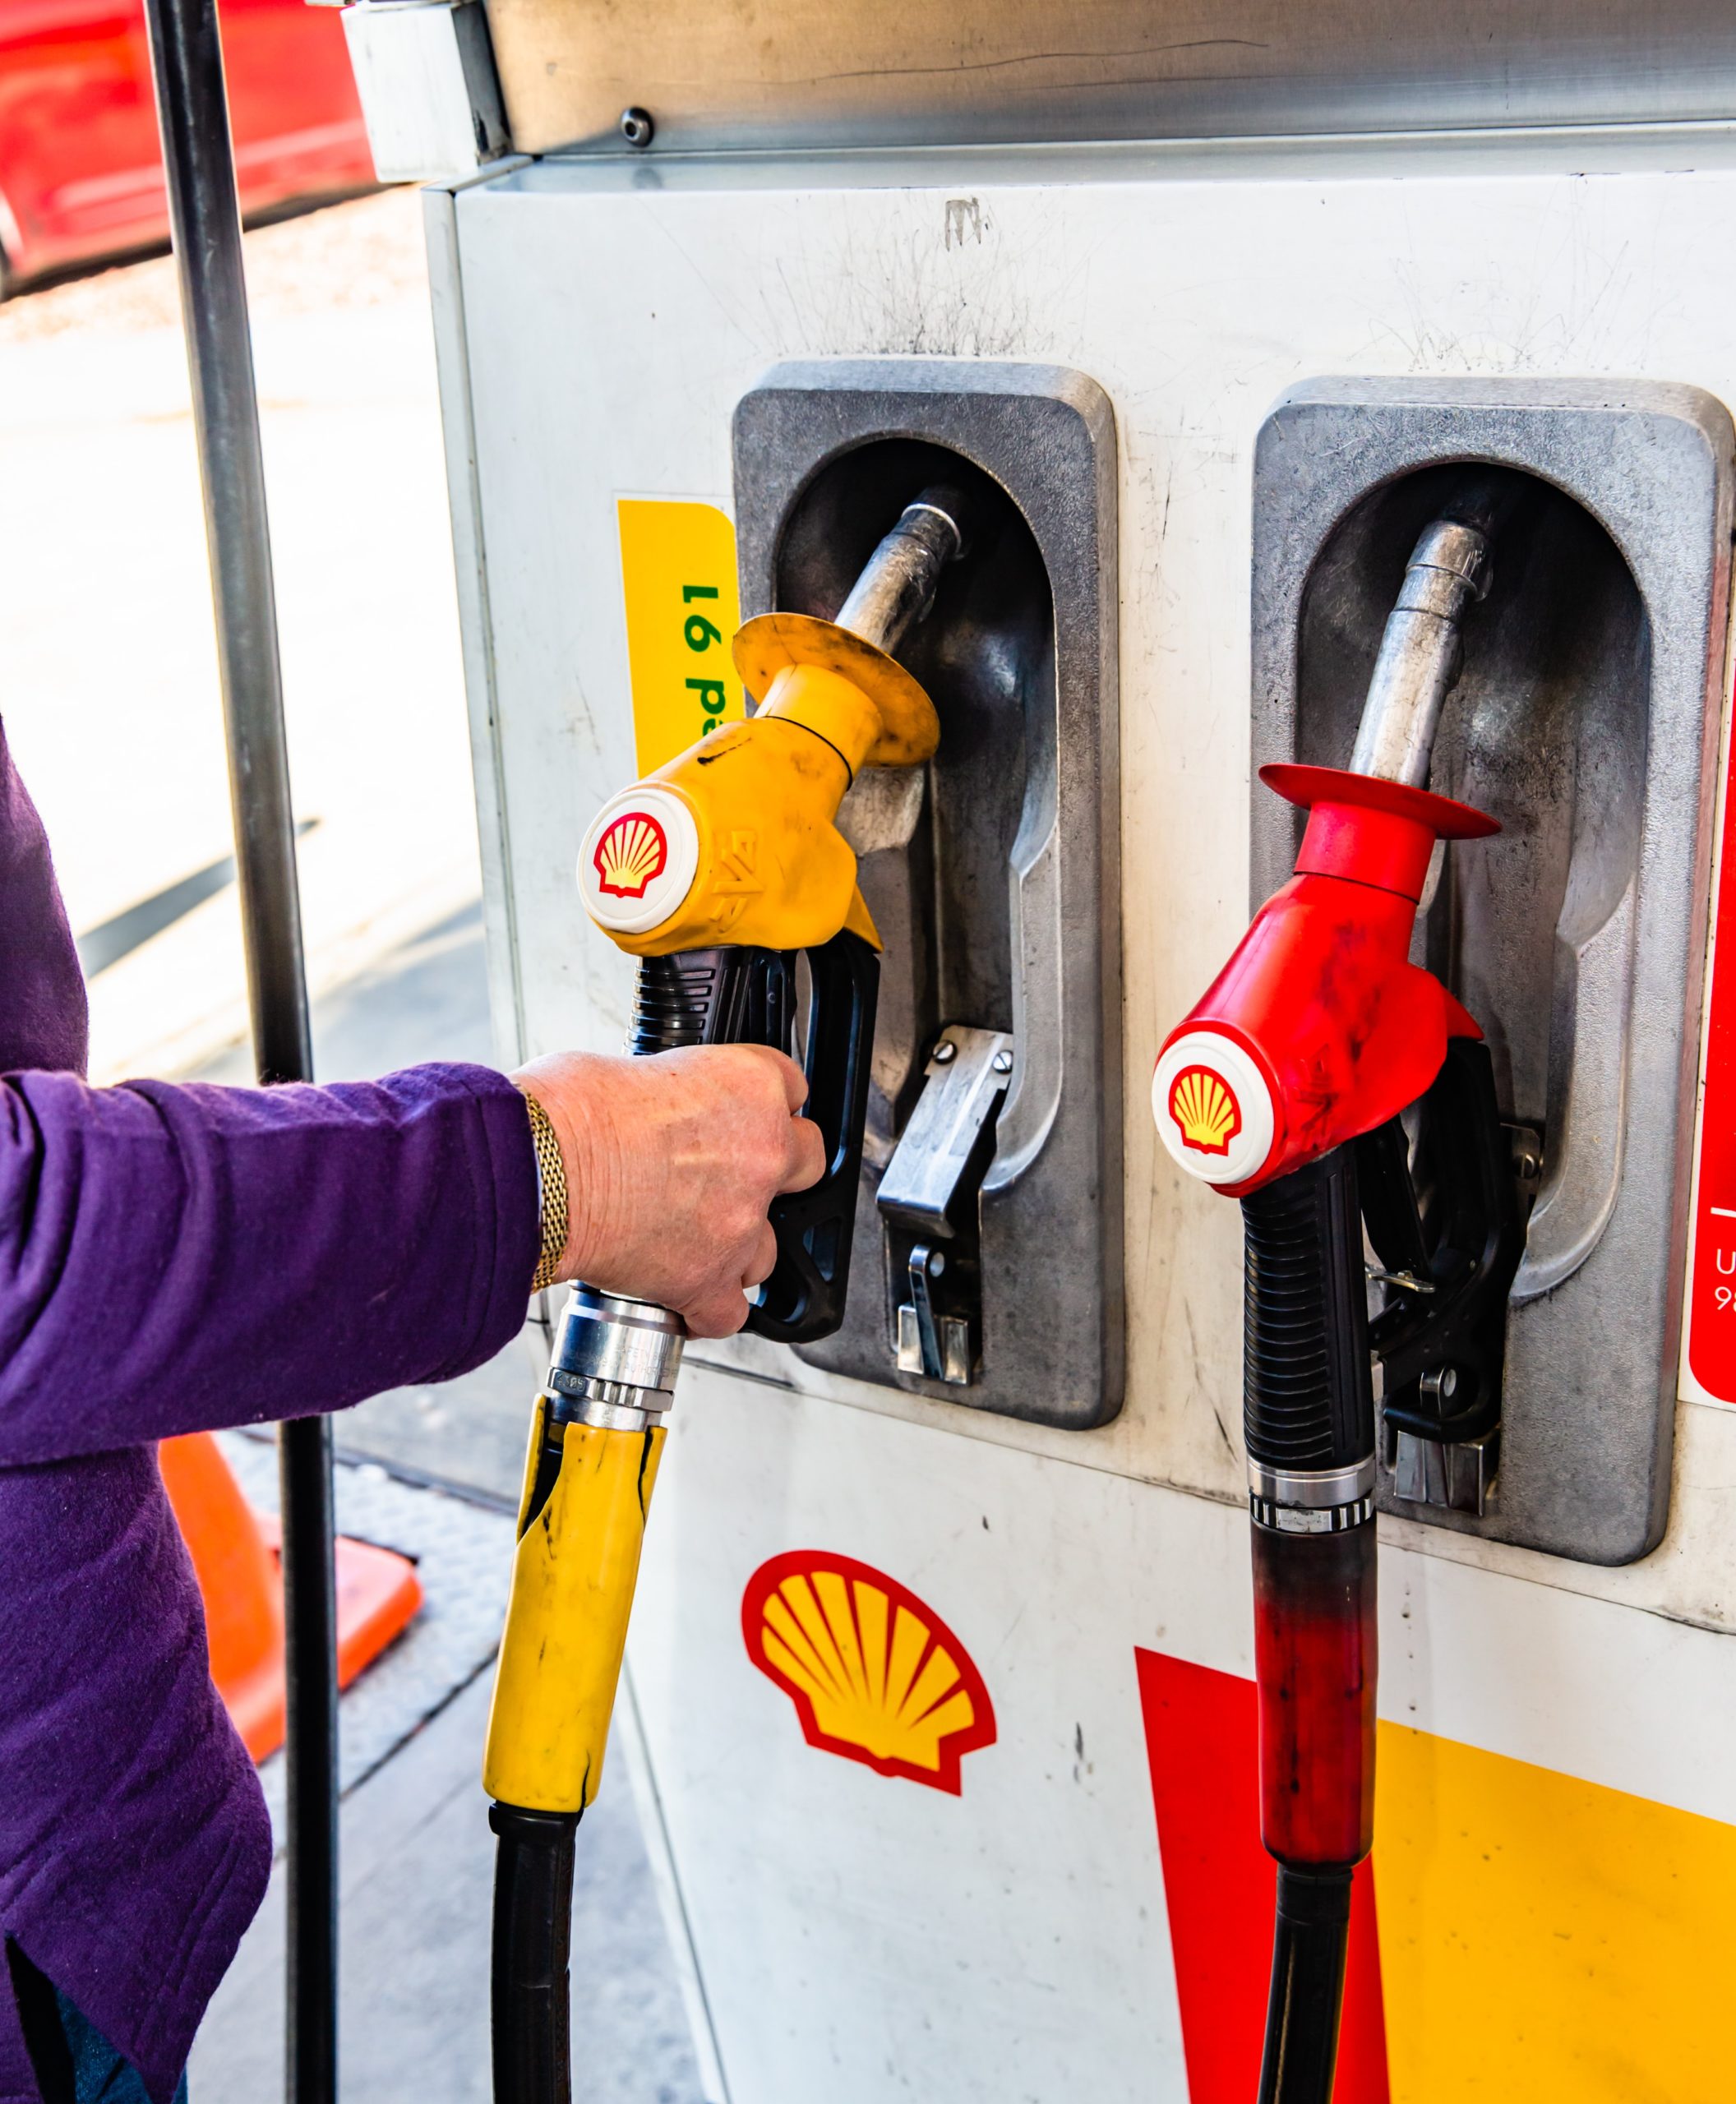 Close-up of petrol pumps dispending Shell fuel. A white person's right arm in a purple sleeve is holding the pump on the left.